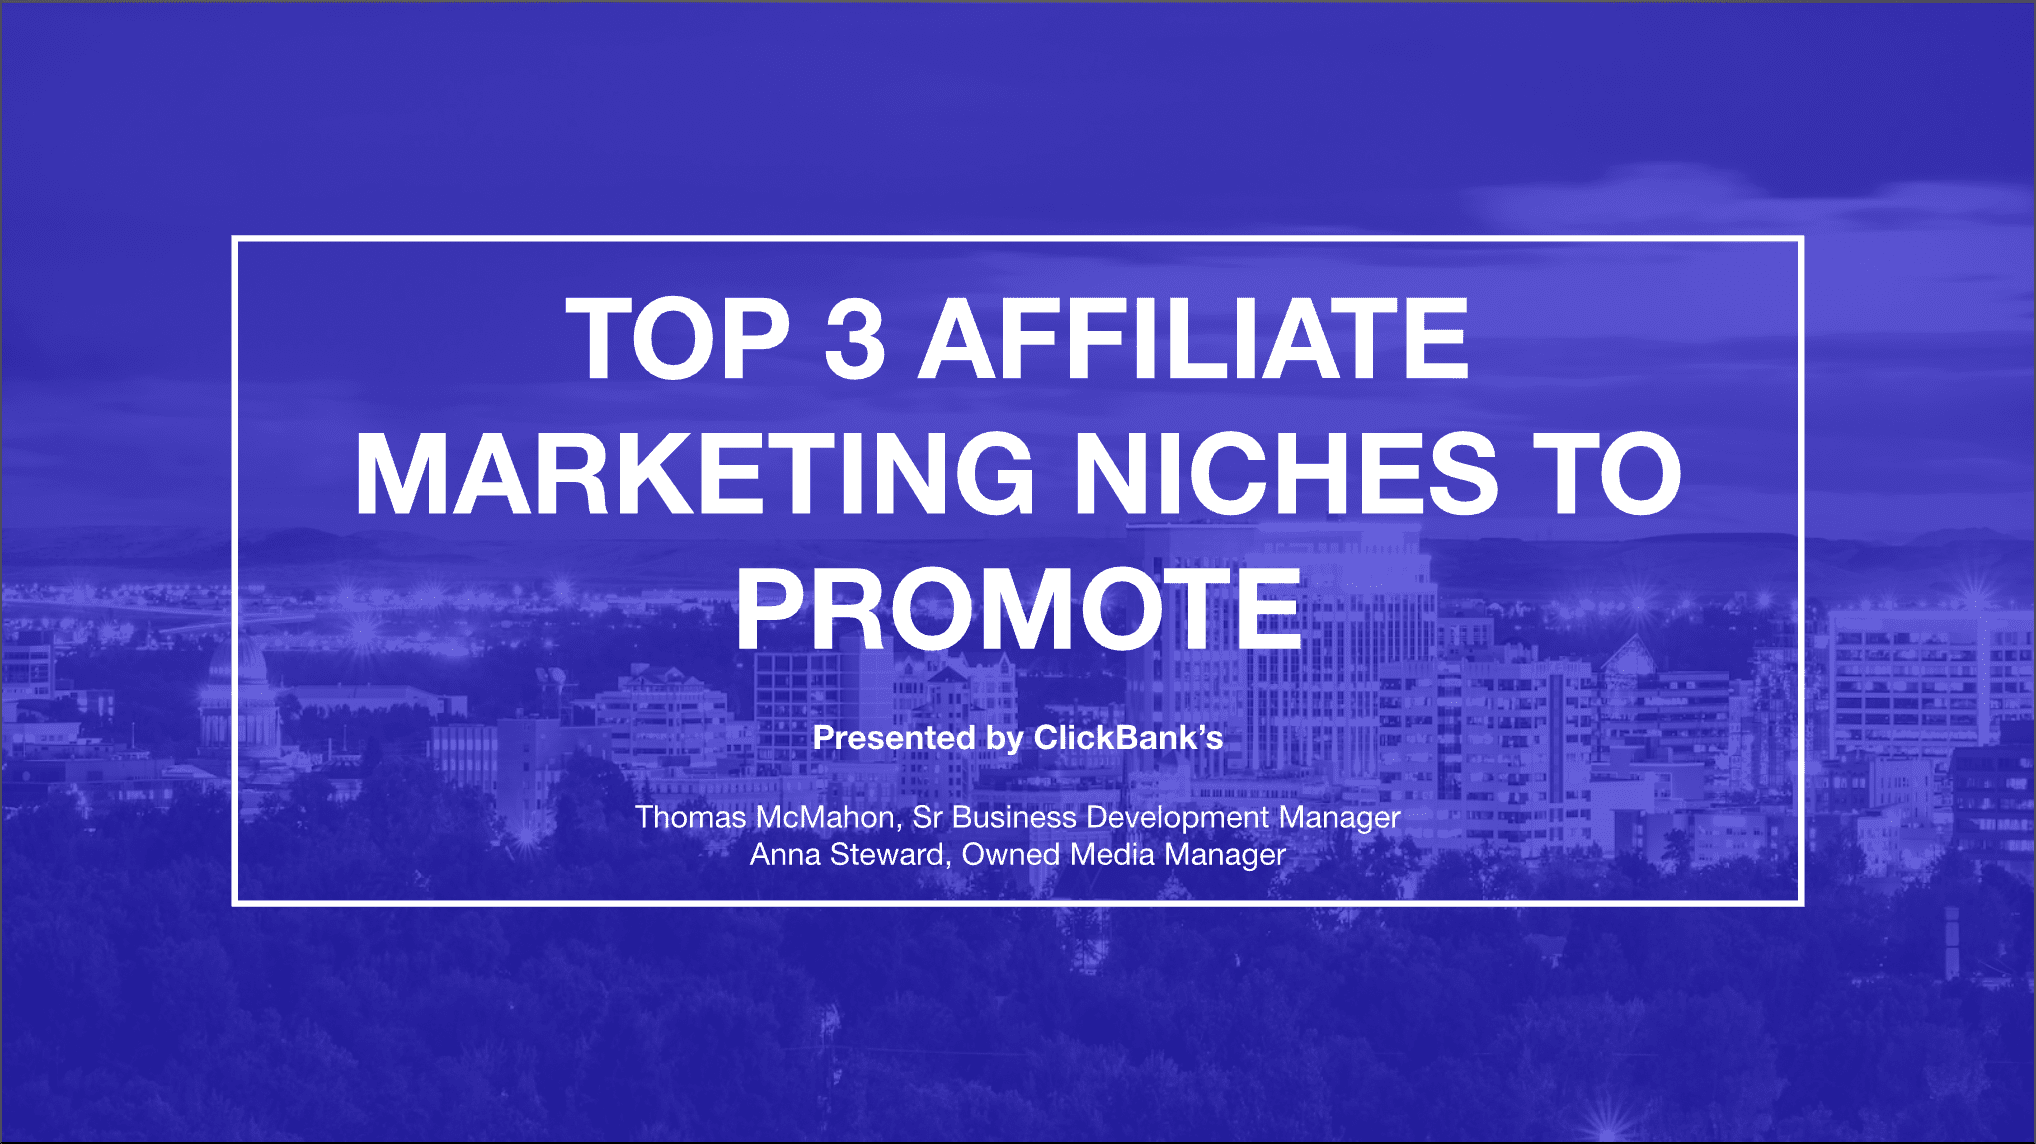 kage afbryde elasticitet The 10 Best Affiliate Marketing Niches on ClickBank in 2023 (Exclusive  Data!) - ClickBank